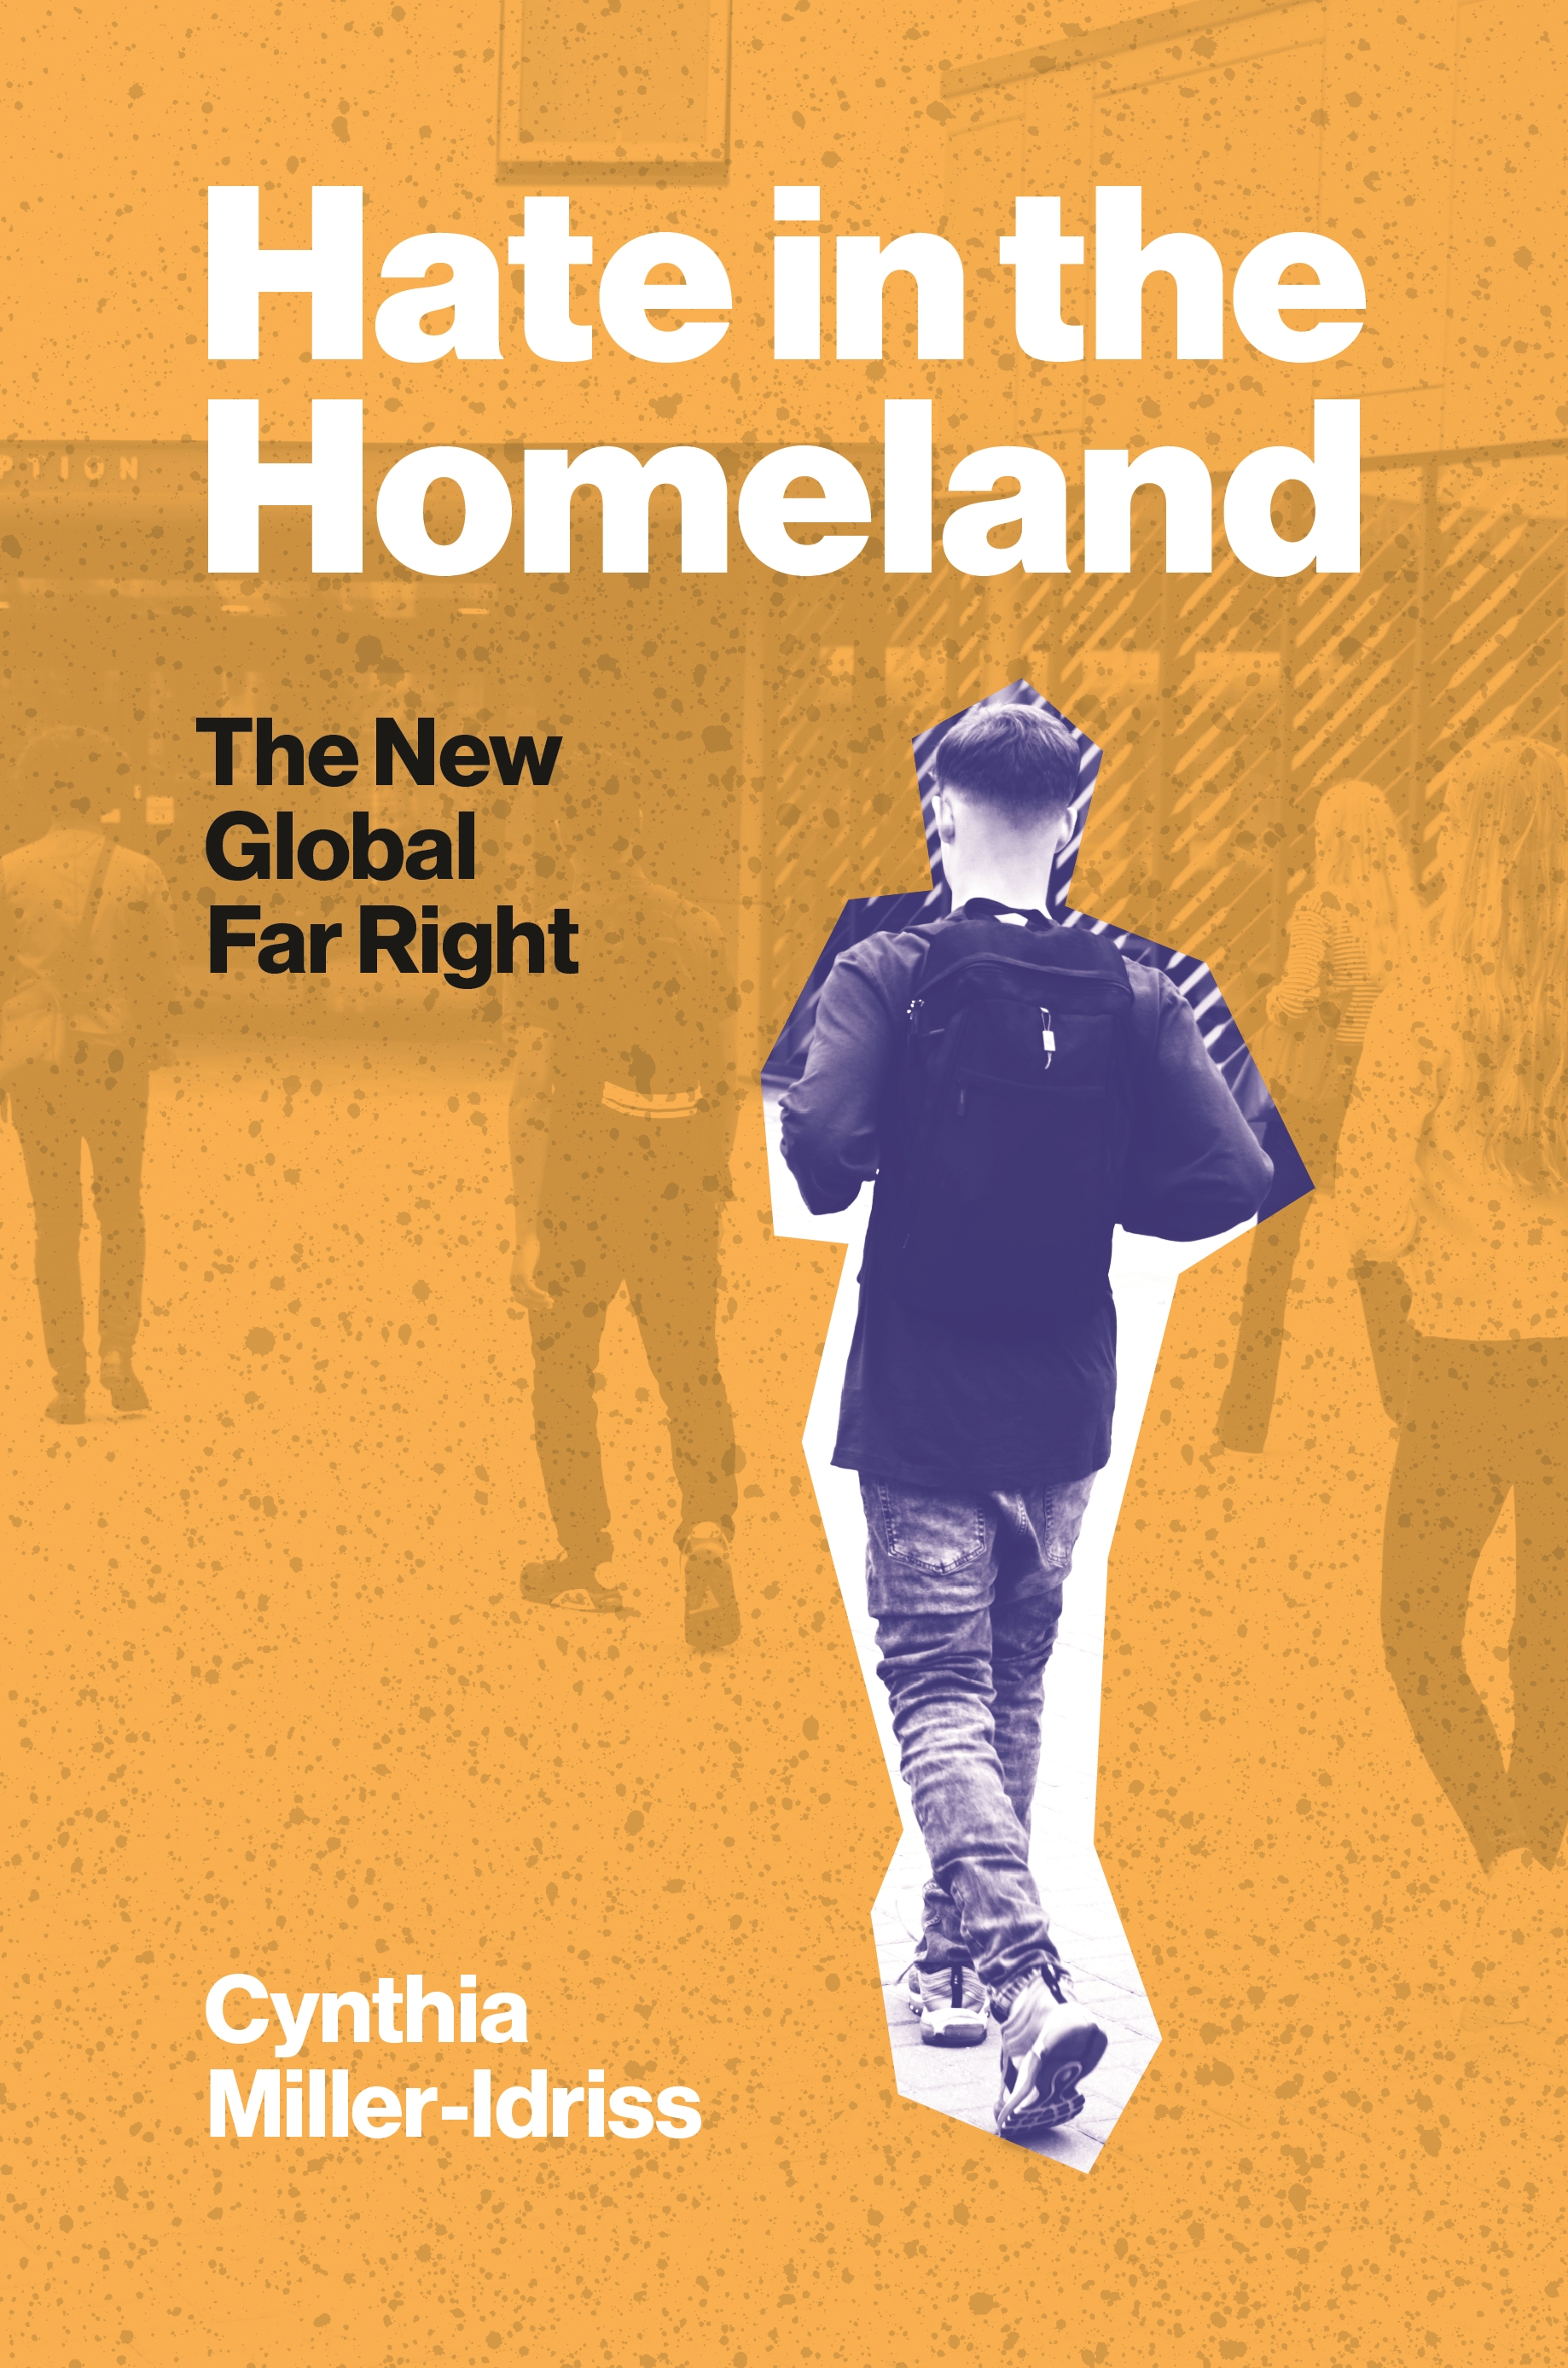 Book gives insight into new global far right